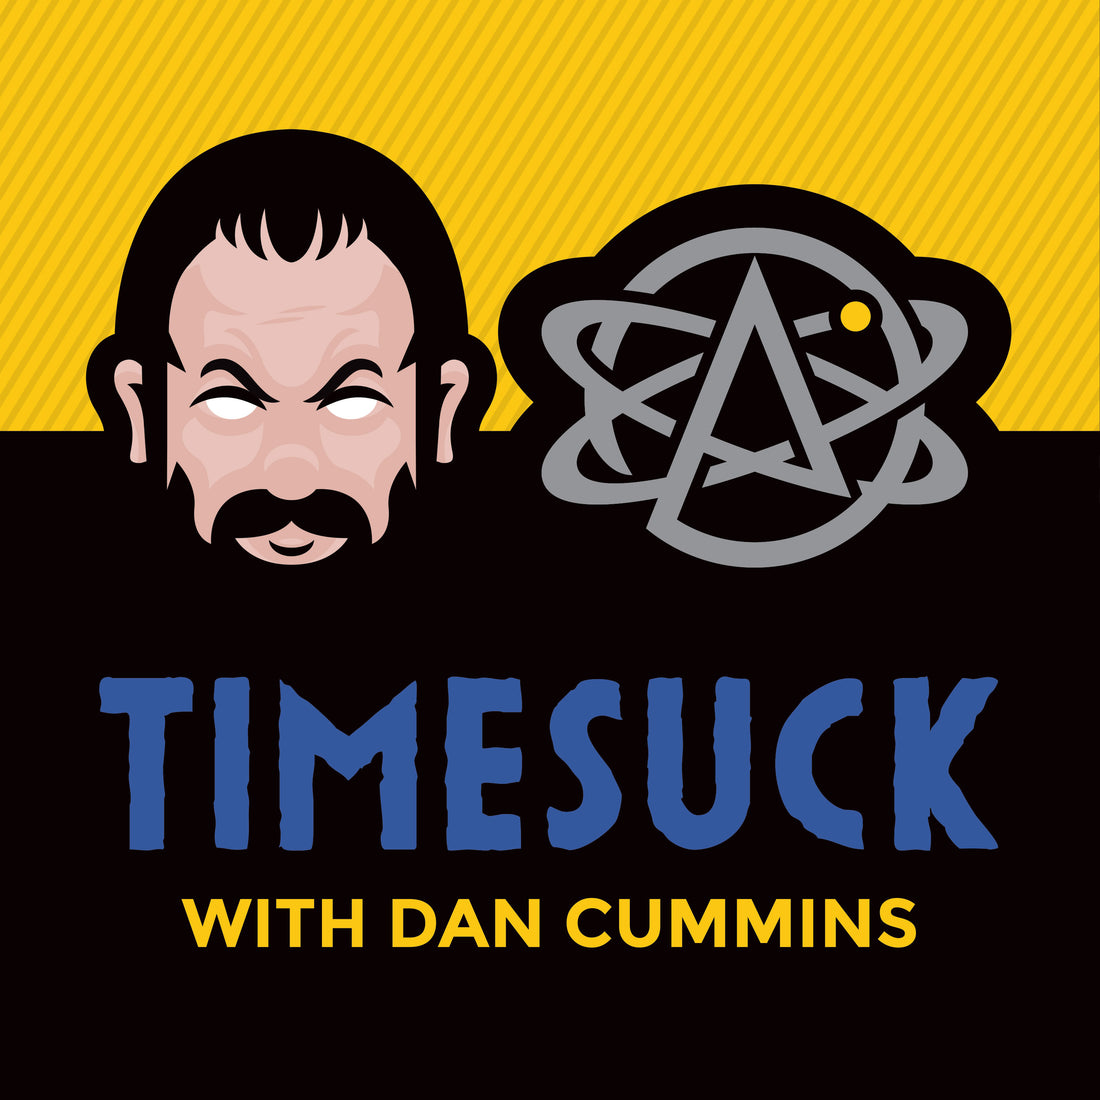 Timesuck Show Intro Ringtone! (mp3 for Android users)